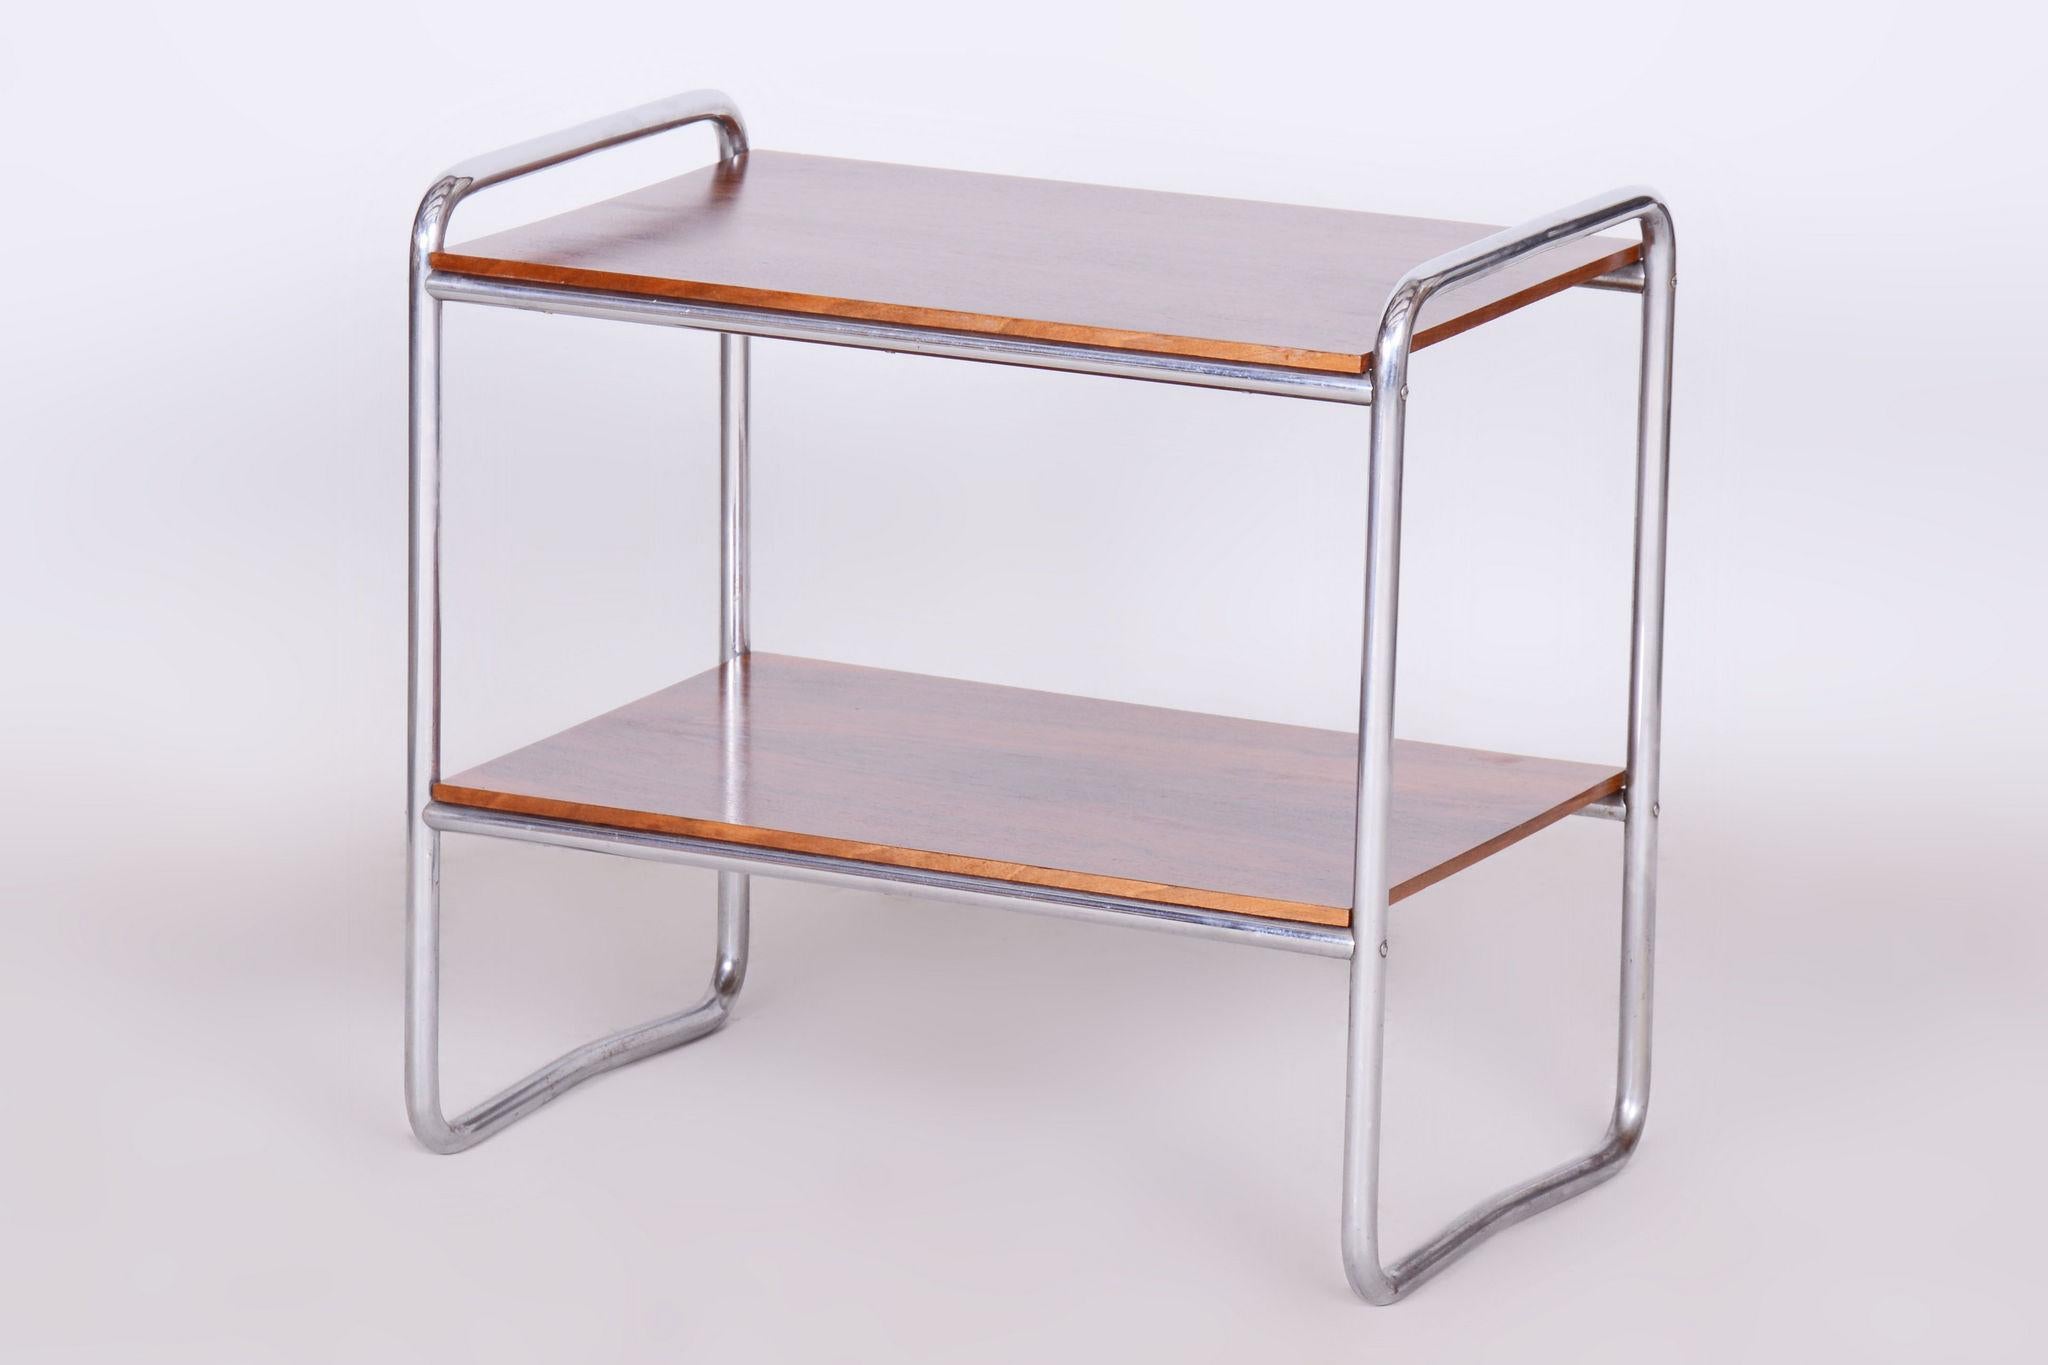 Restored Bauhaus Side Table.

Source: Czechia 
Period: 1930-1939
Material: Walnut, Chrome-Plated Steel

Our professional refurbishing team in Czechia has fully restored it according to the original process. 
The chrome parts have been cleaned and